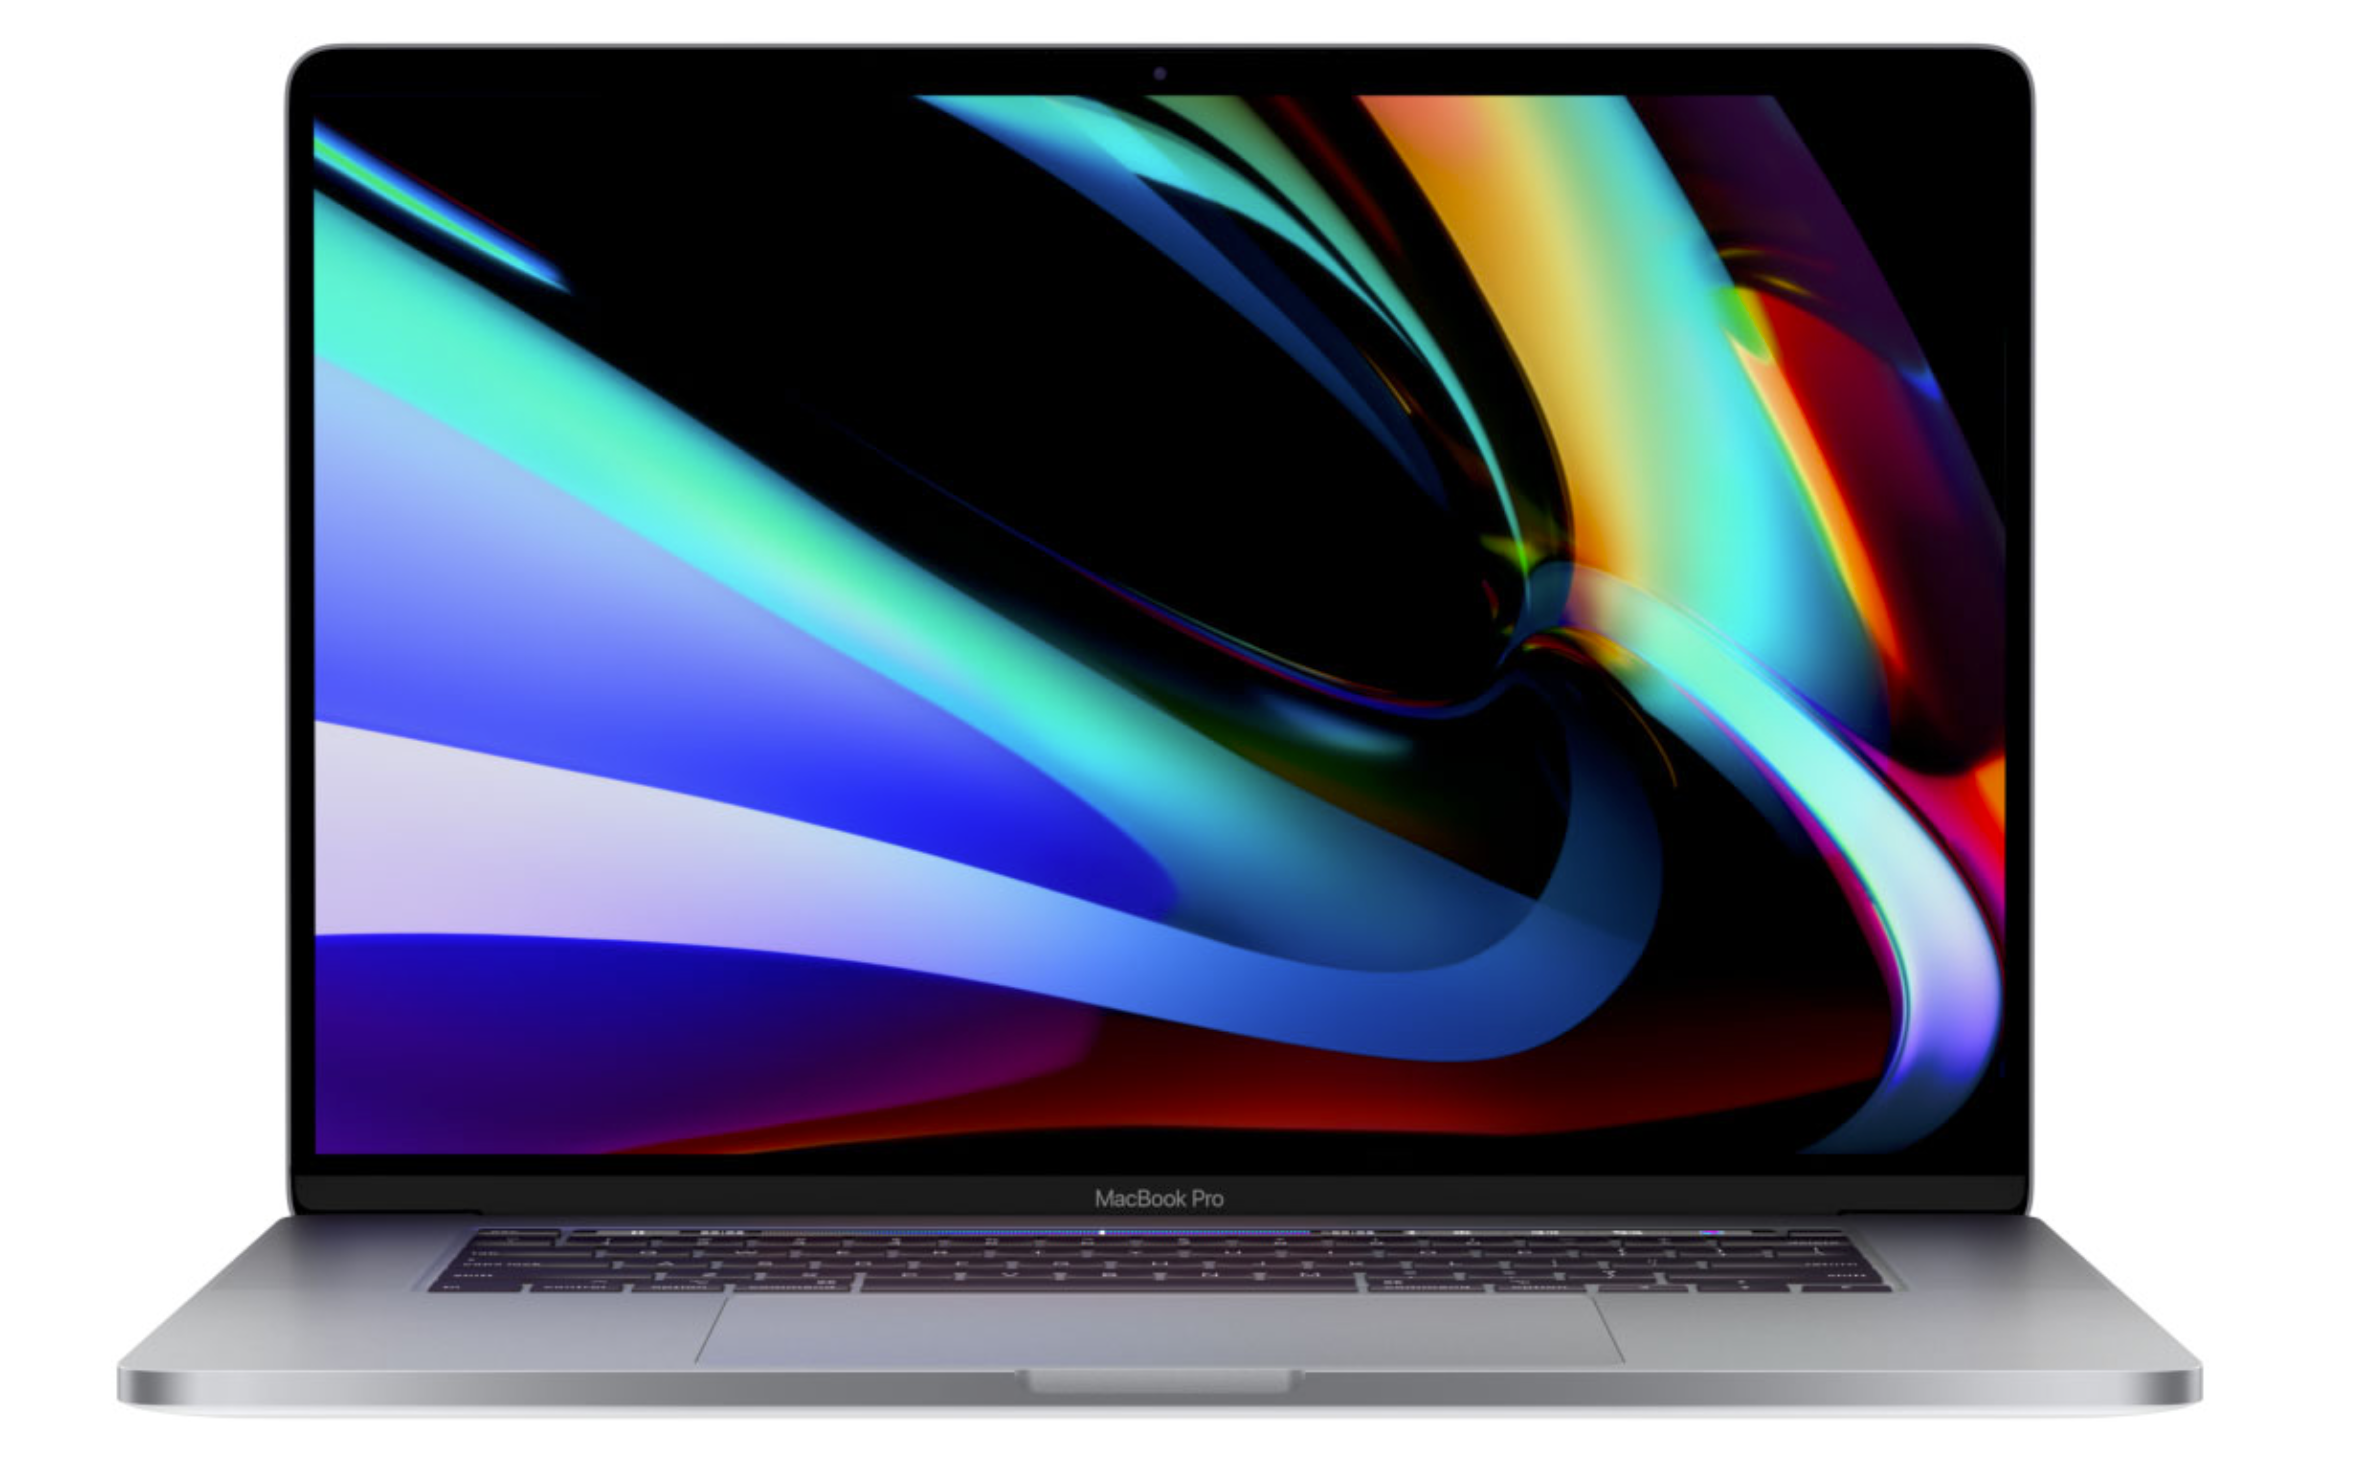 Mac specs for gaming windows 10